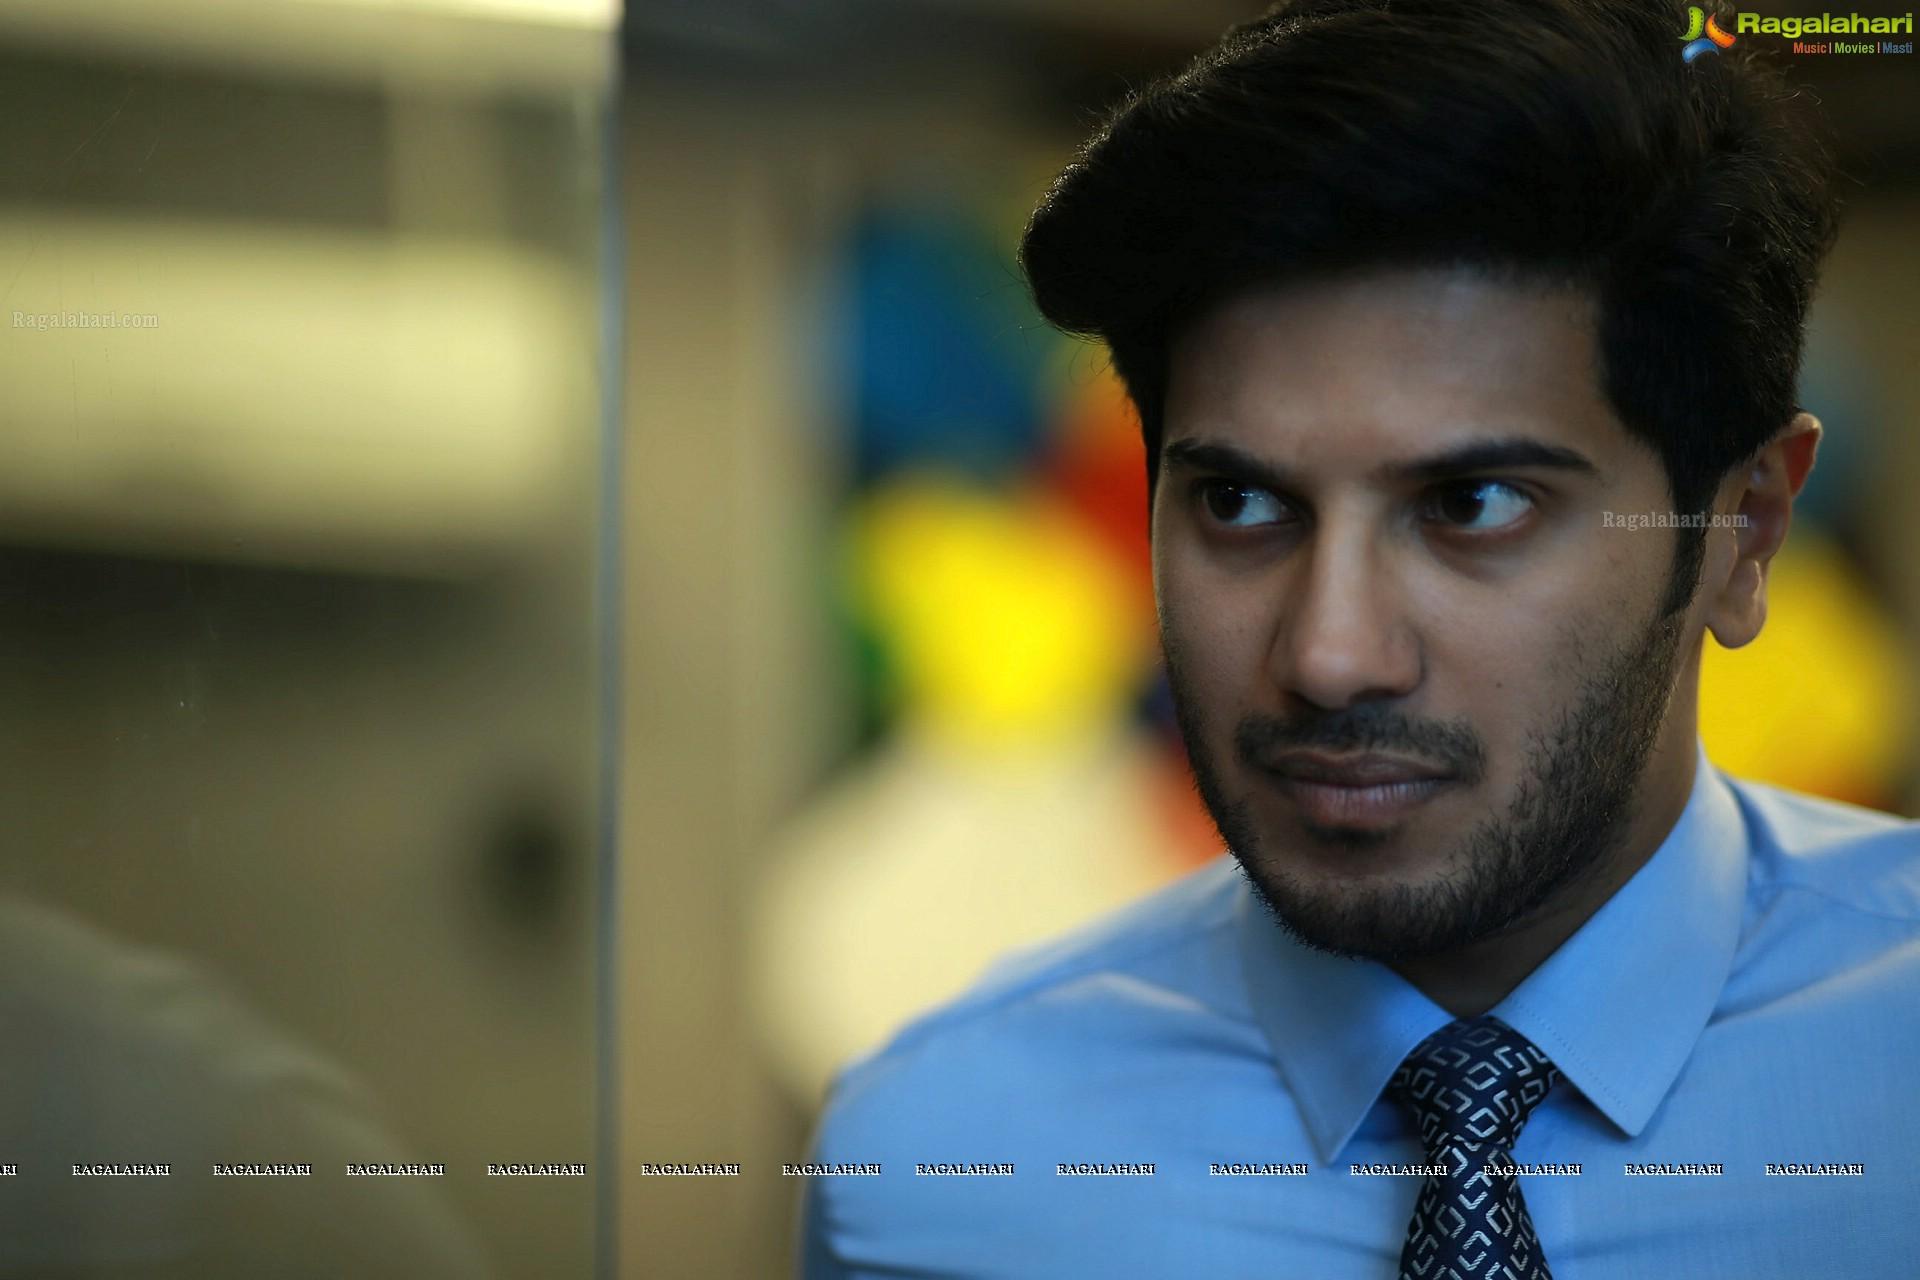 Dulquer Salmaan (HD) Image 2. Latest Bollywood Actor wallpaper